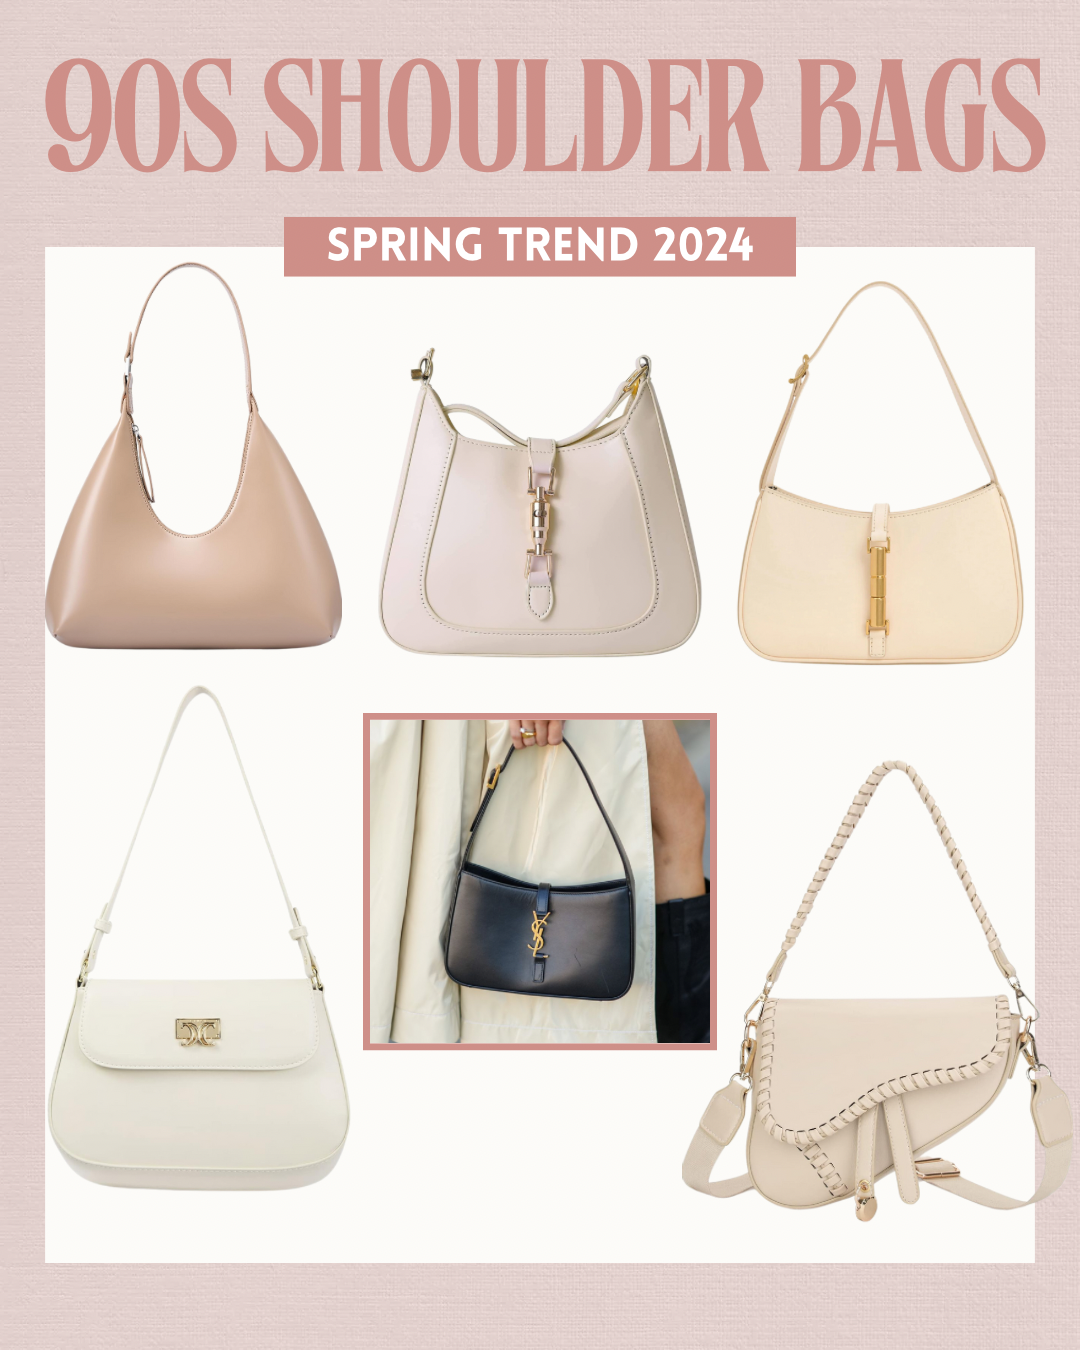 What are the fashion trends for spring 2024? The 8 Best Spring 2024 Fashion Trends for Women | What is the hottest trend in 2024?